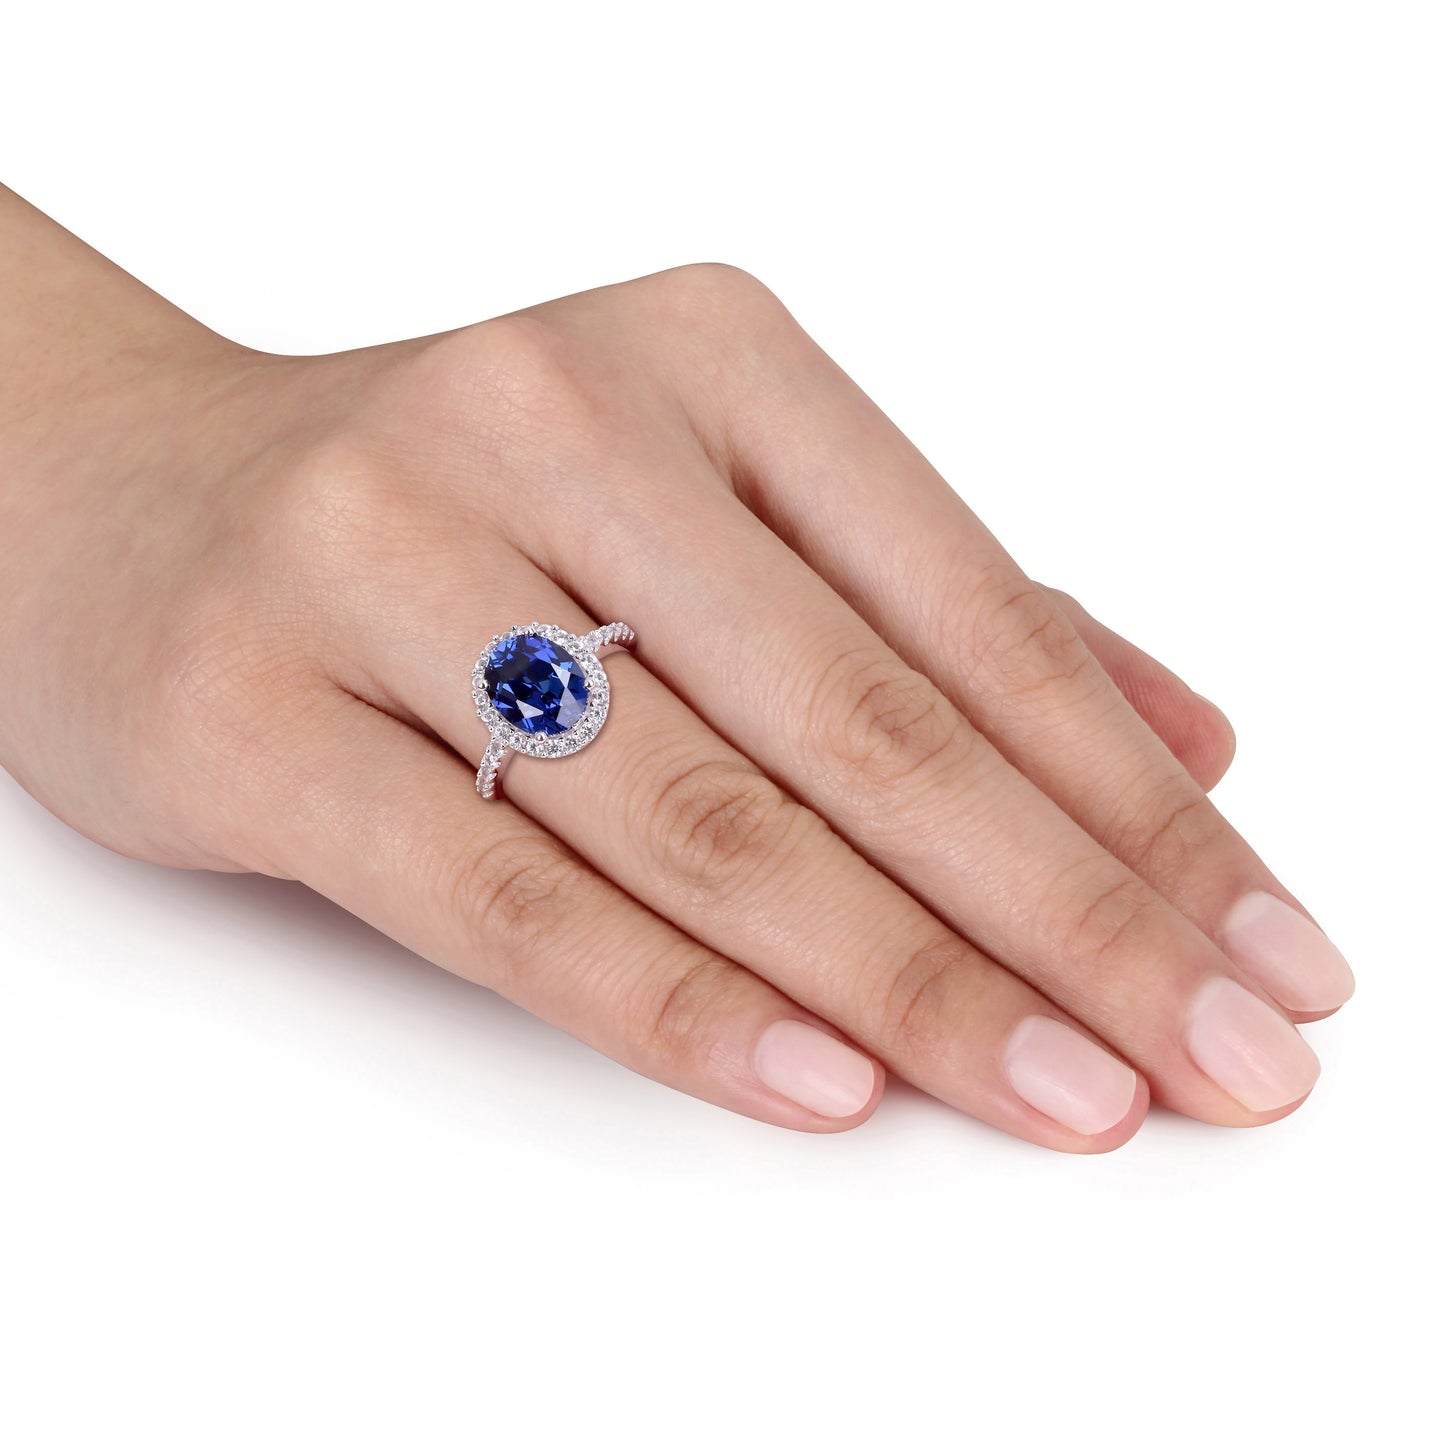 Oval Cut Blue & White Sapphire Halo Ring in 10k White Gold